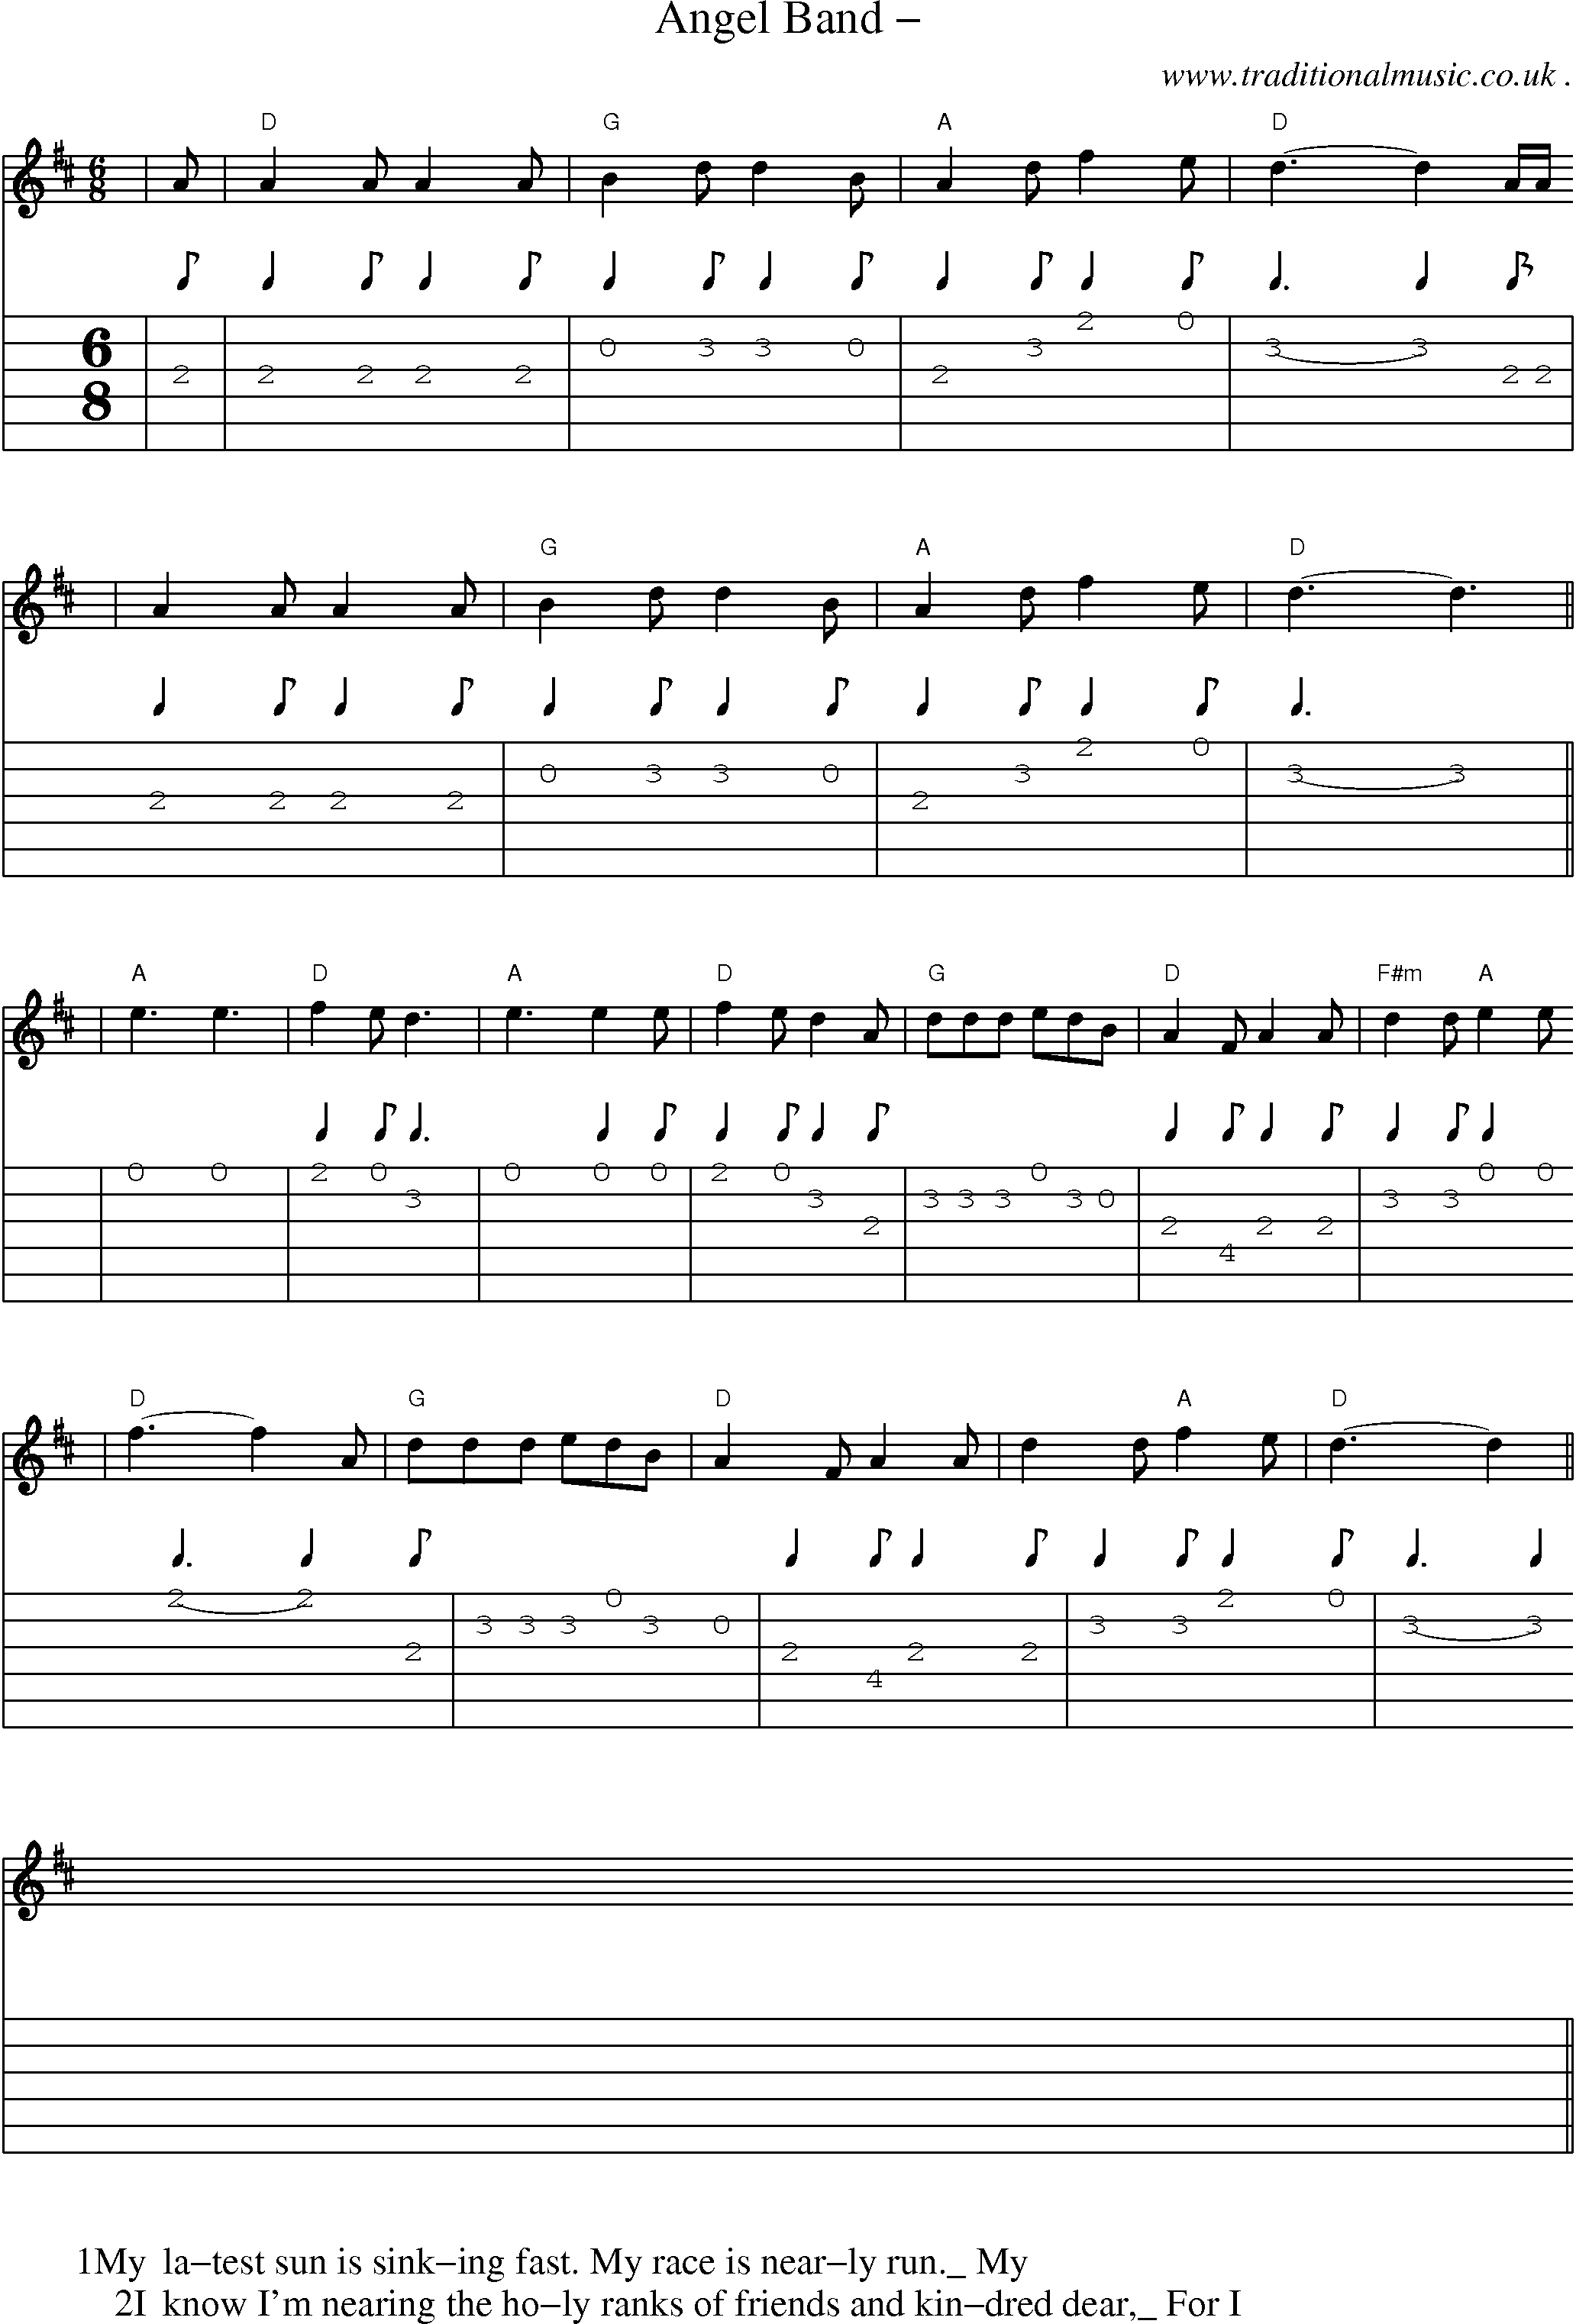 Music Score and Guitar Tabs for Angel Band